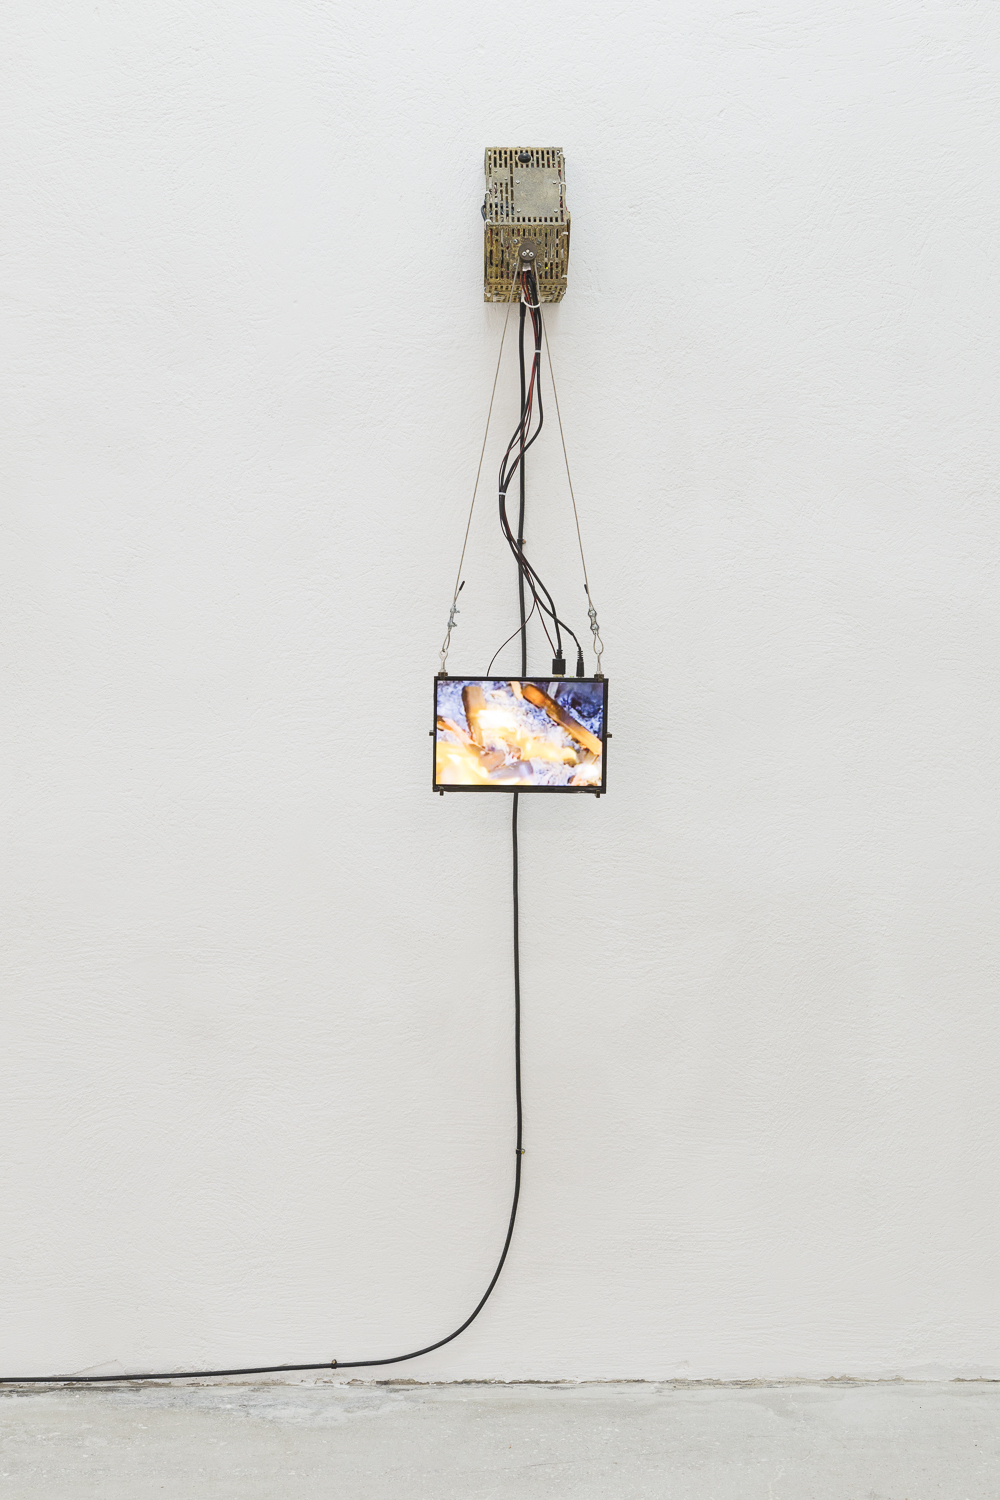 Thomas P. Grogan, L’Ami du Feu, 2021, Polyester resin, stone grit, oxidised steel, polylactic acid, copper powder, stepper motor, Raspberry Pi, power supply, computer fans, push button, accelerometer, 11 inch screen and interface, 90 x 24 x 19 cm